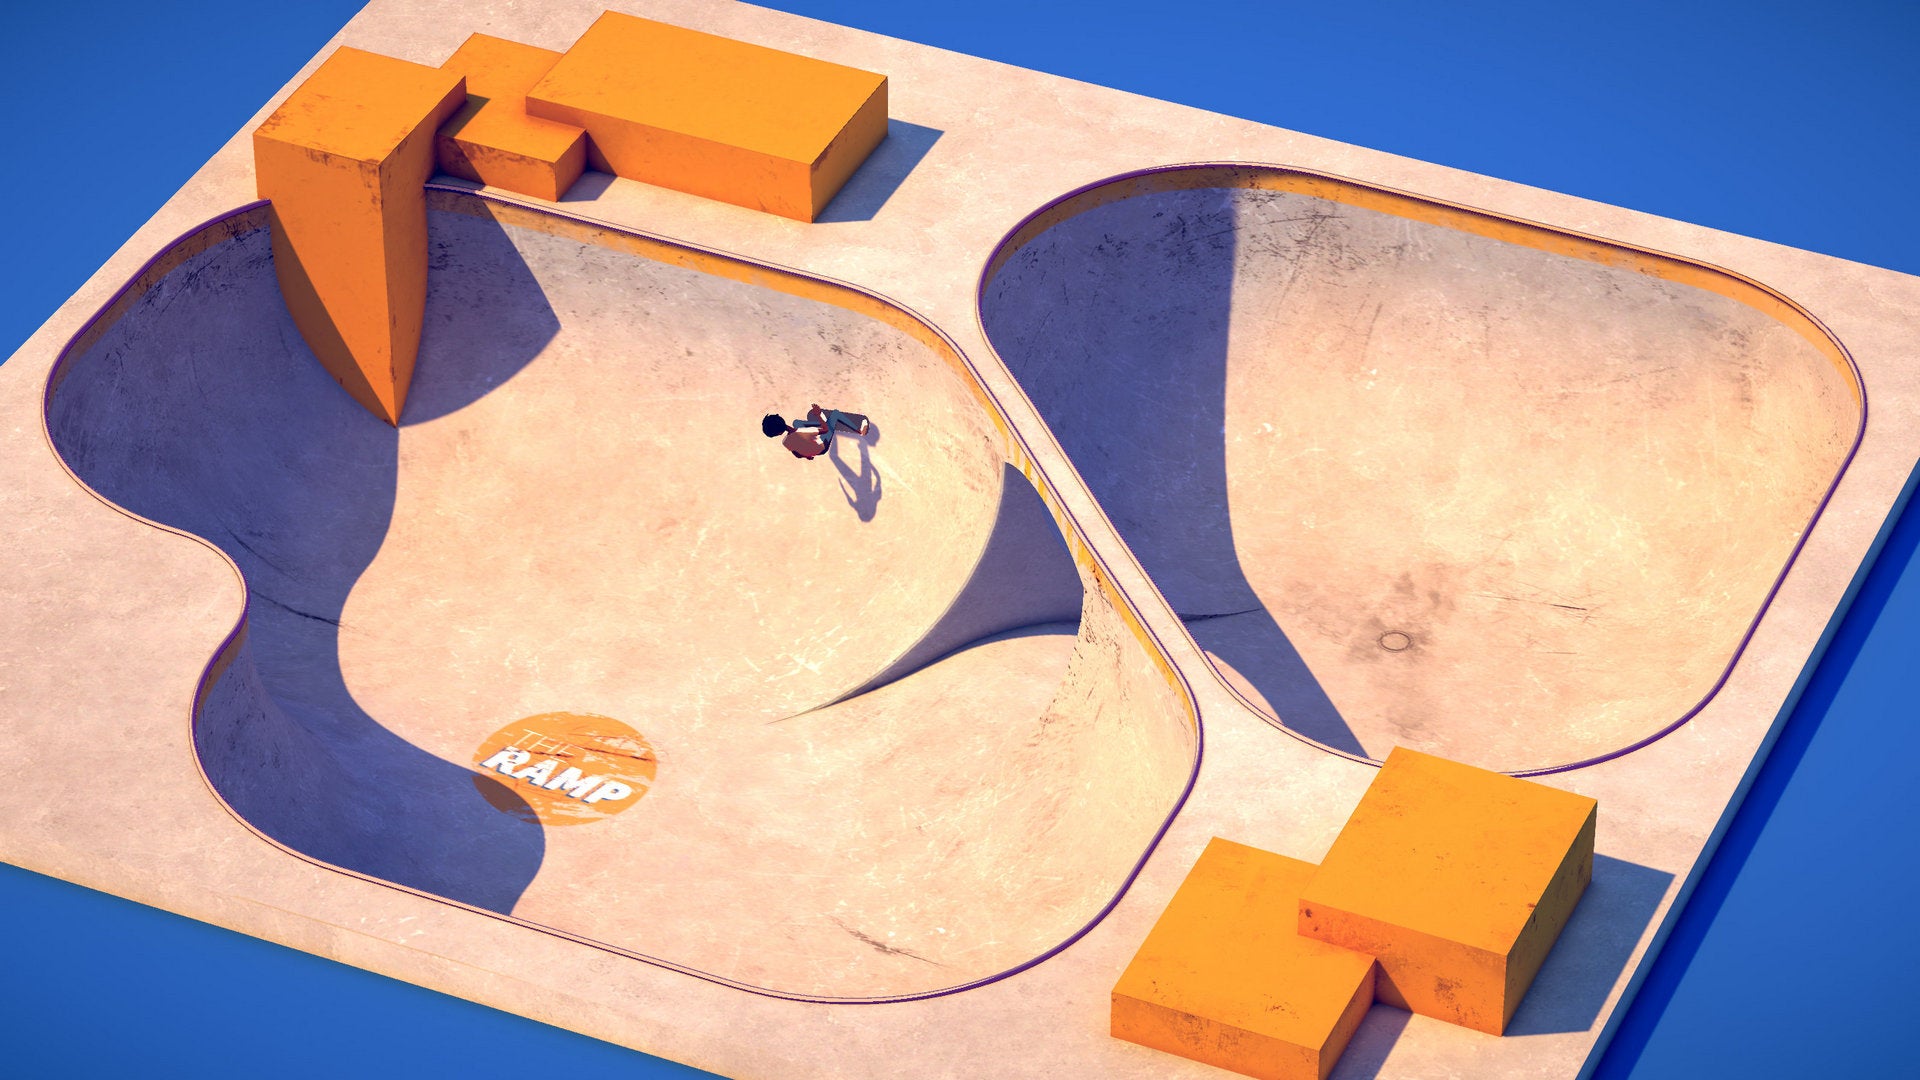 A top-down, isometric view of a skateboard park in The Ramp